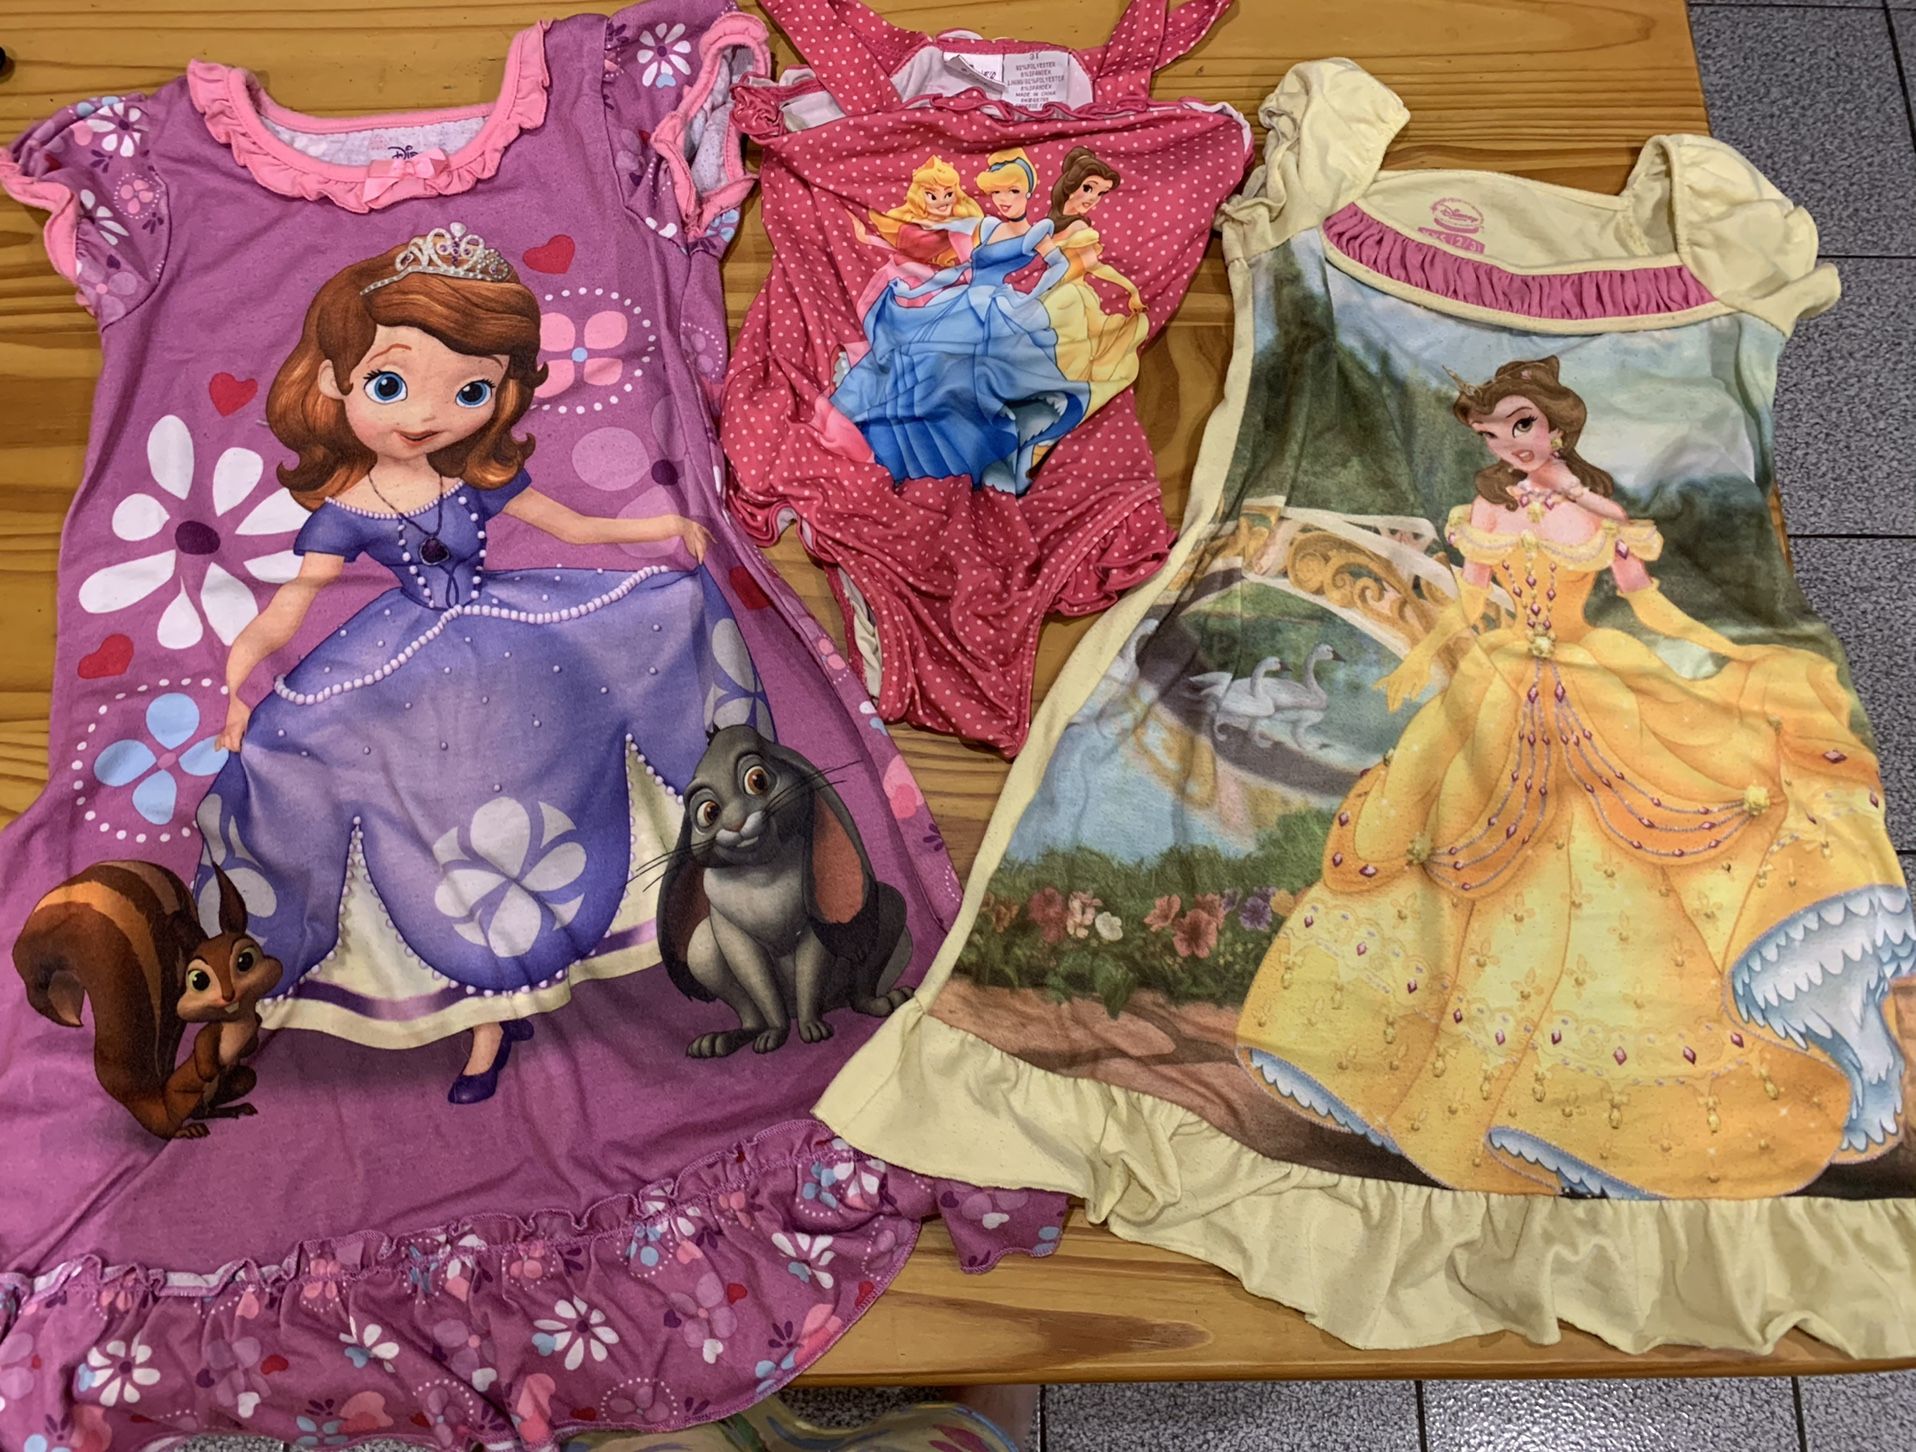 Girls Clothes Children All Sizes 2t , 3t, 4t, 5 ,6 ,7/8,8 ,10,10/12 Great Condition 